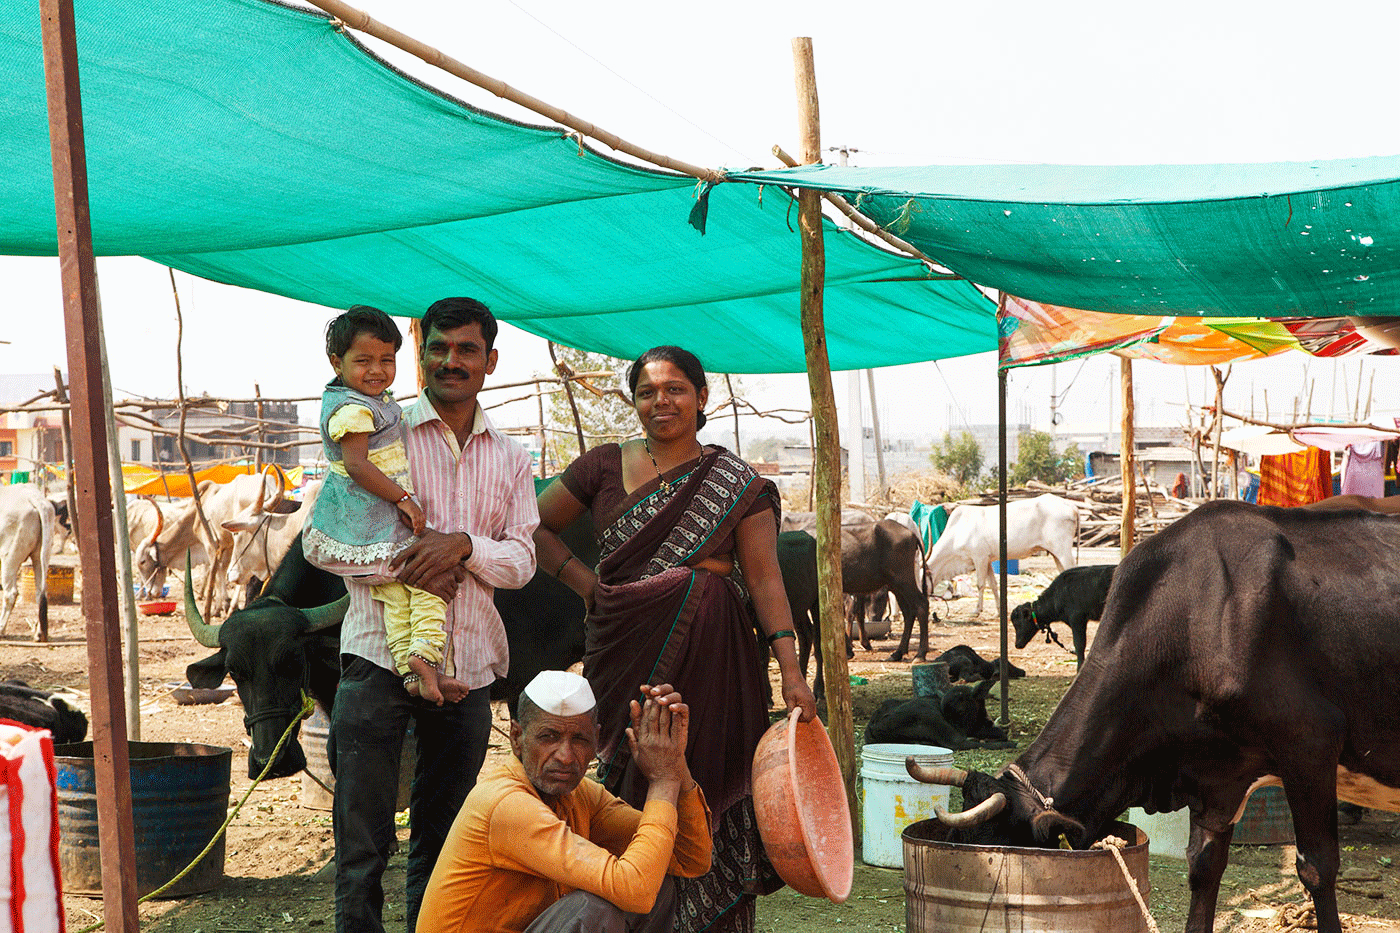 Sarika and Anil Sawant with their family at the cattle camp